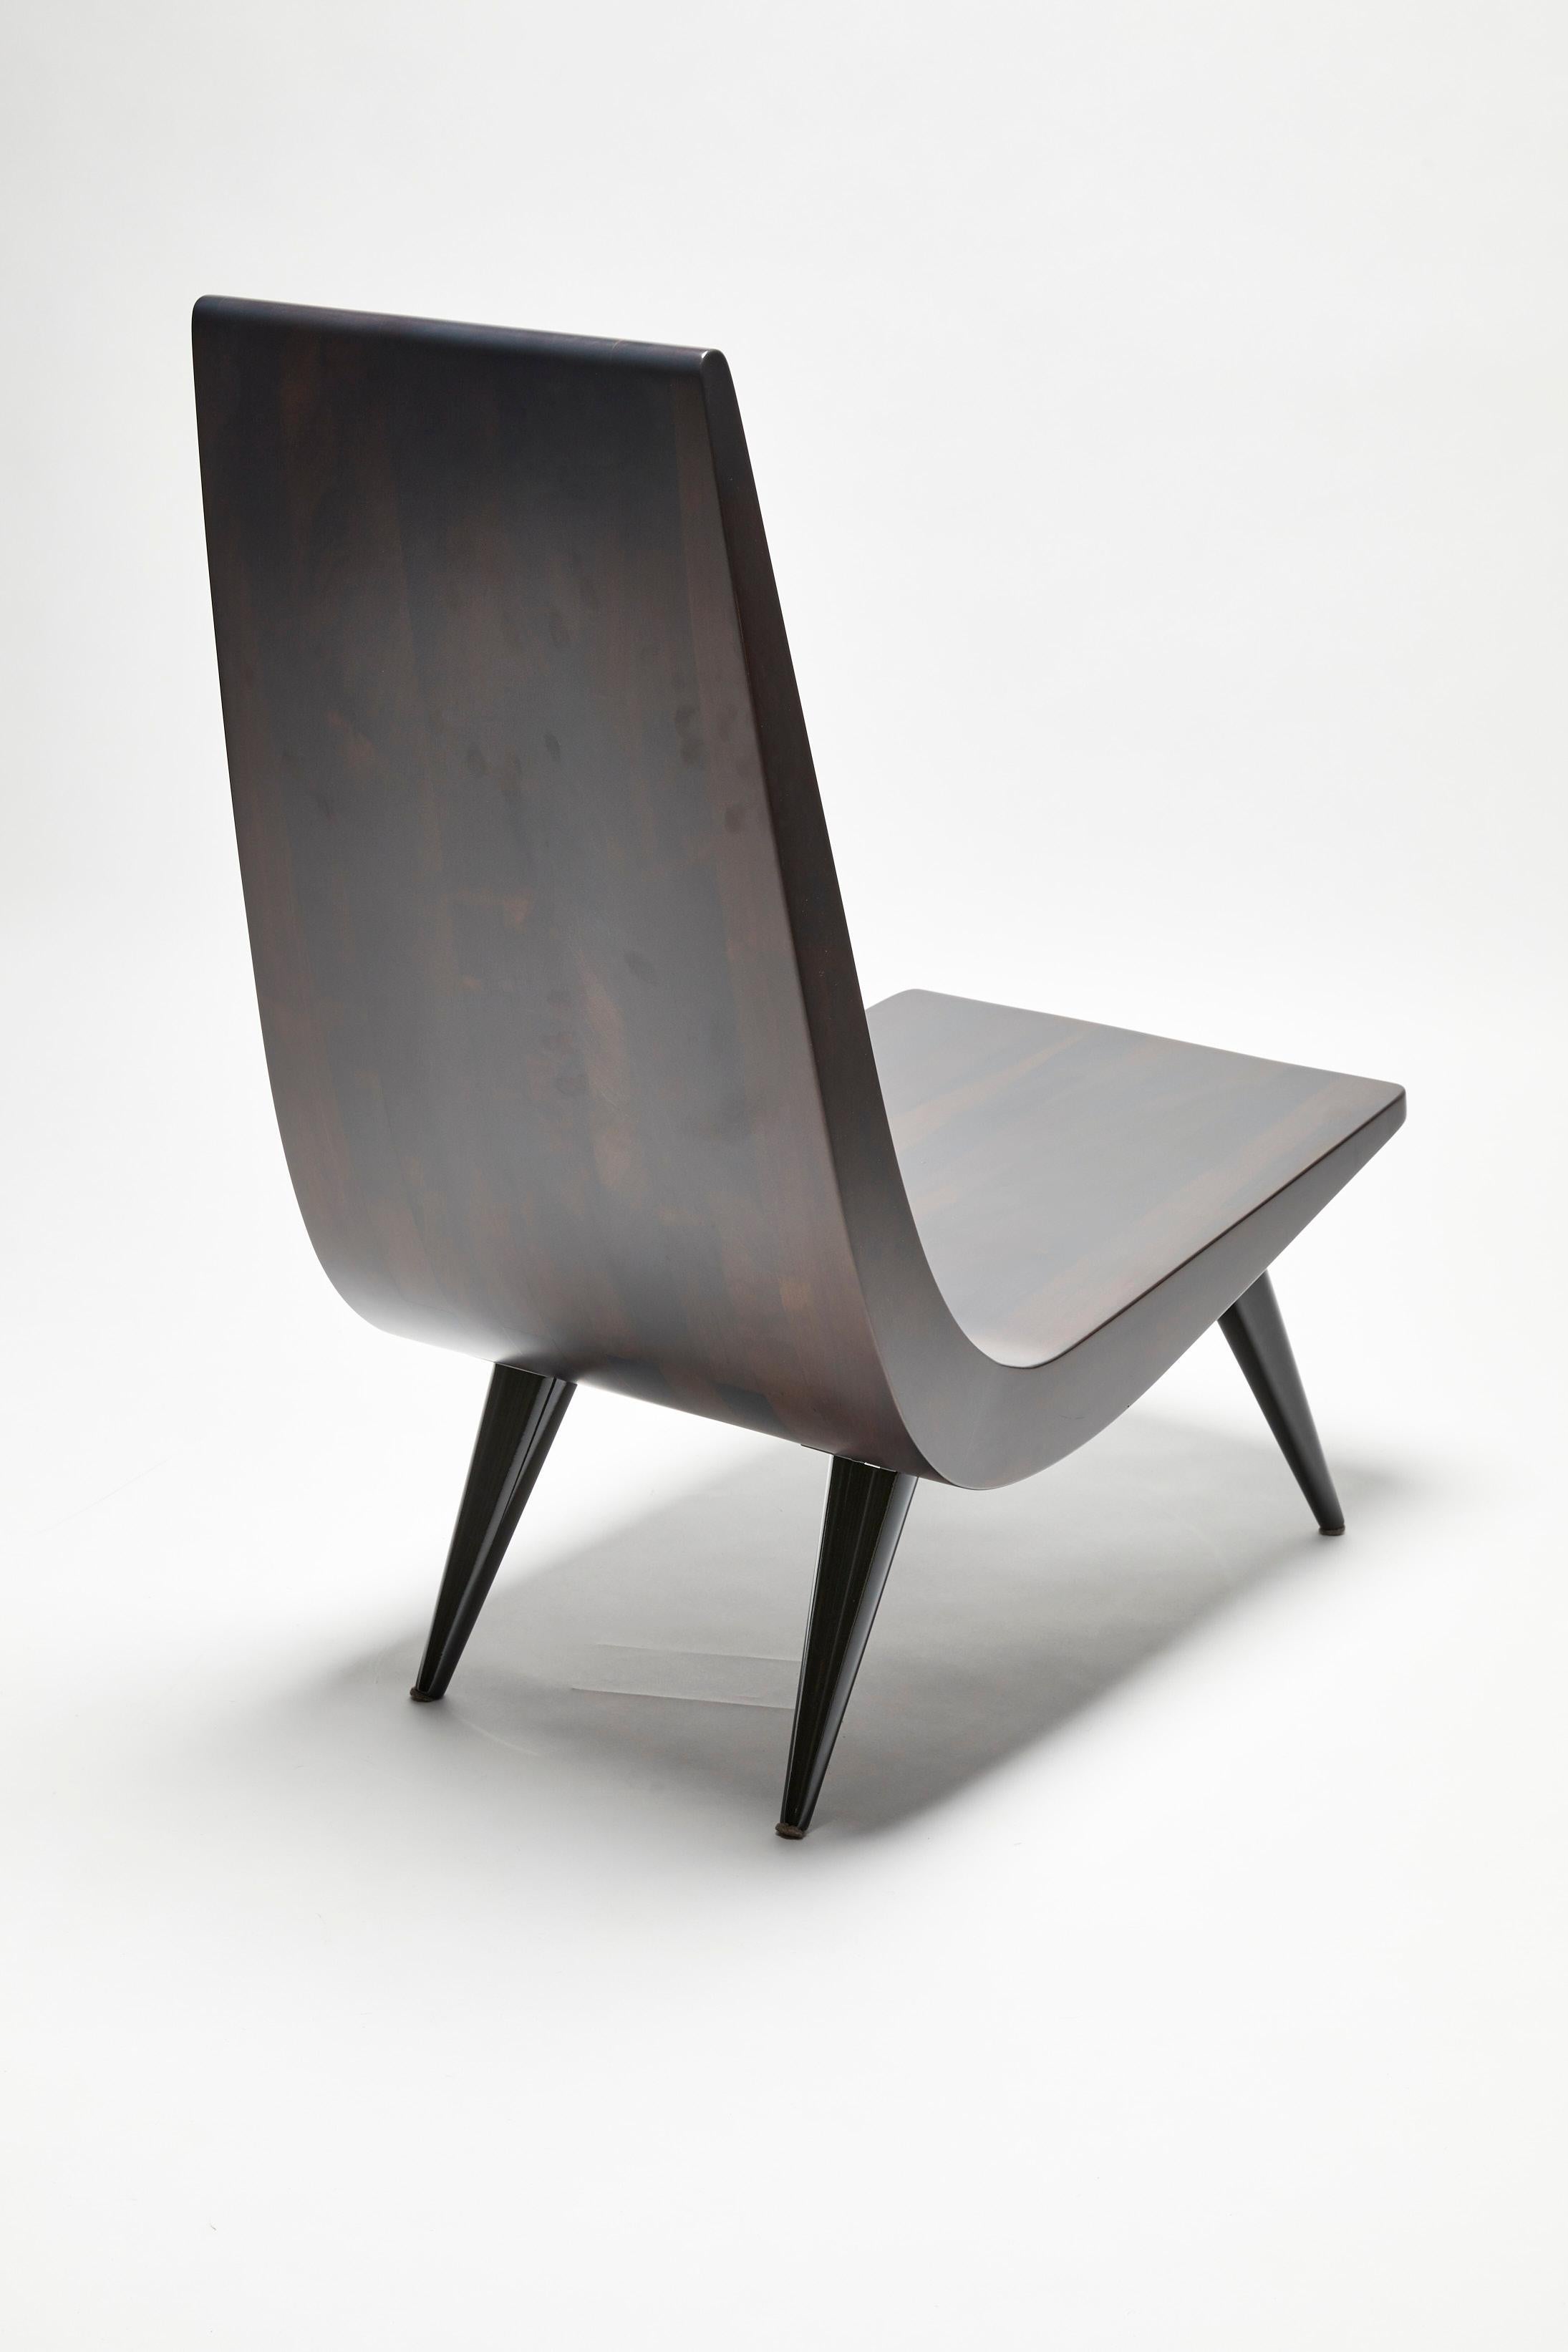 Lounge chair, JAH, by Reda Amalou, 2019, Walnut and Steel legs  1